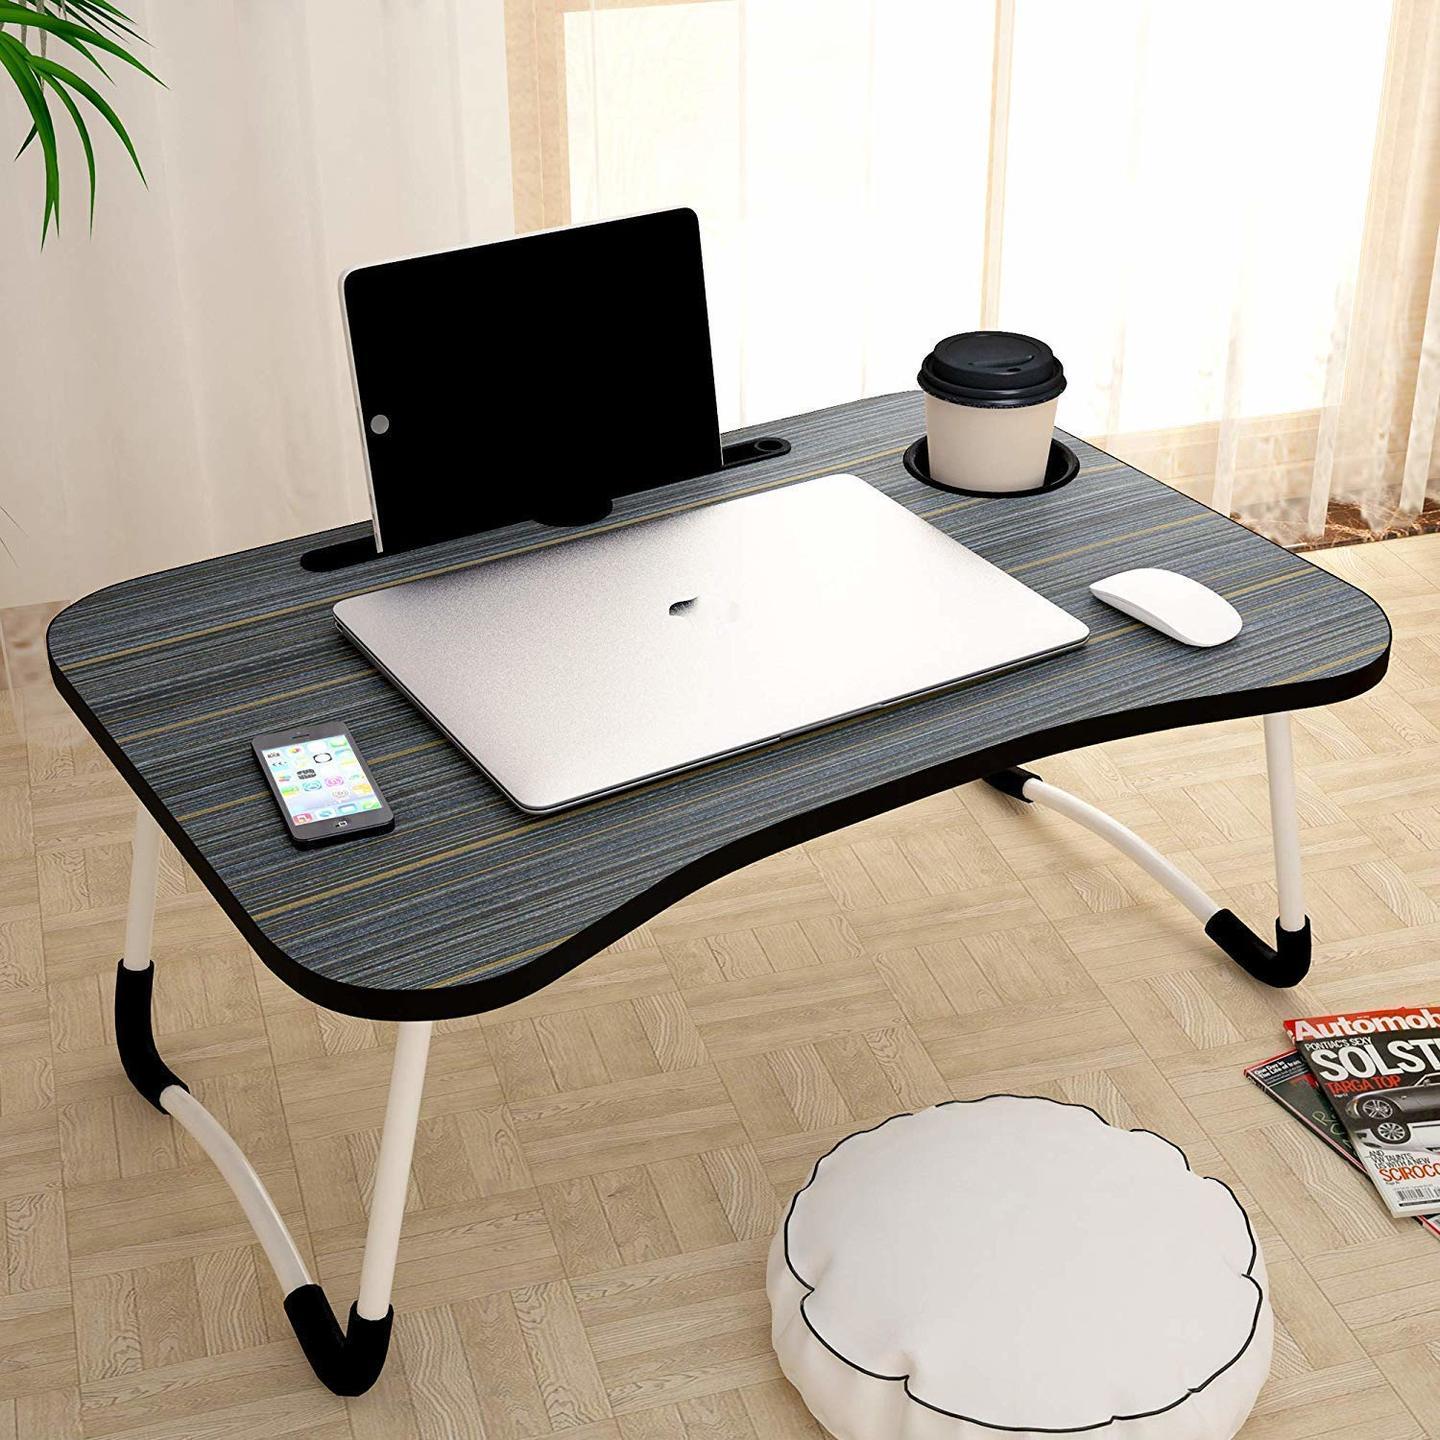 White Apple Multi-Purpose Laptop Table with Dock Stand and Coffee Cup HolderStudy - Free  Ship